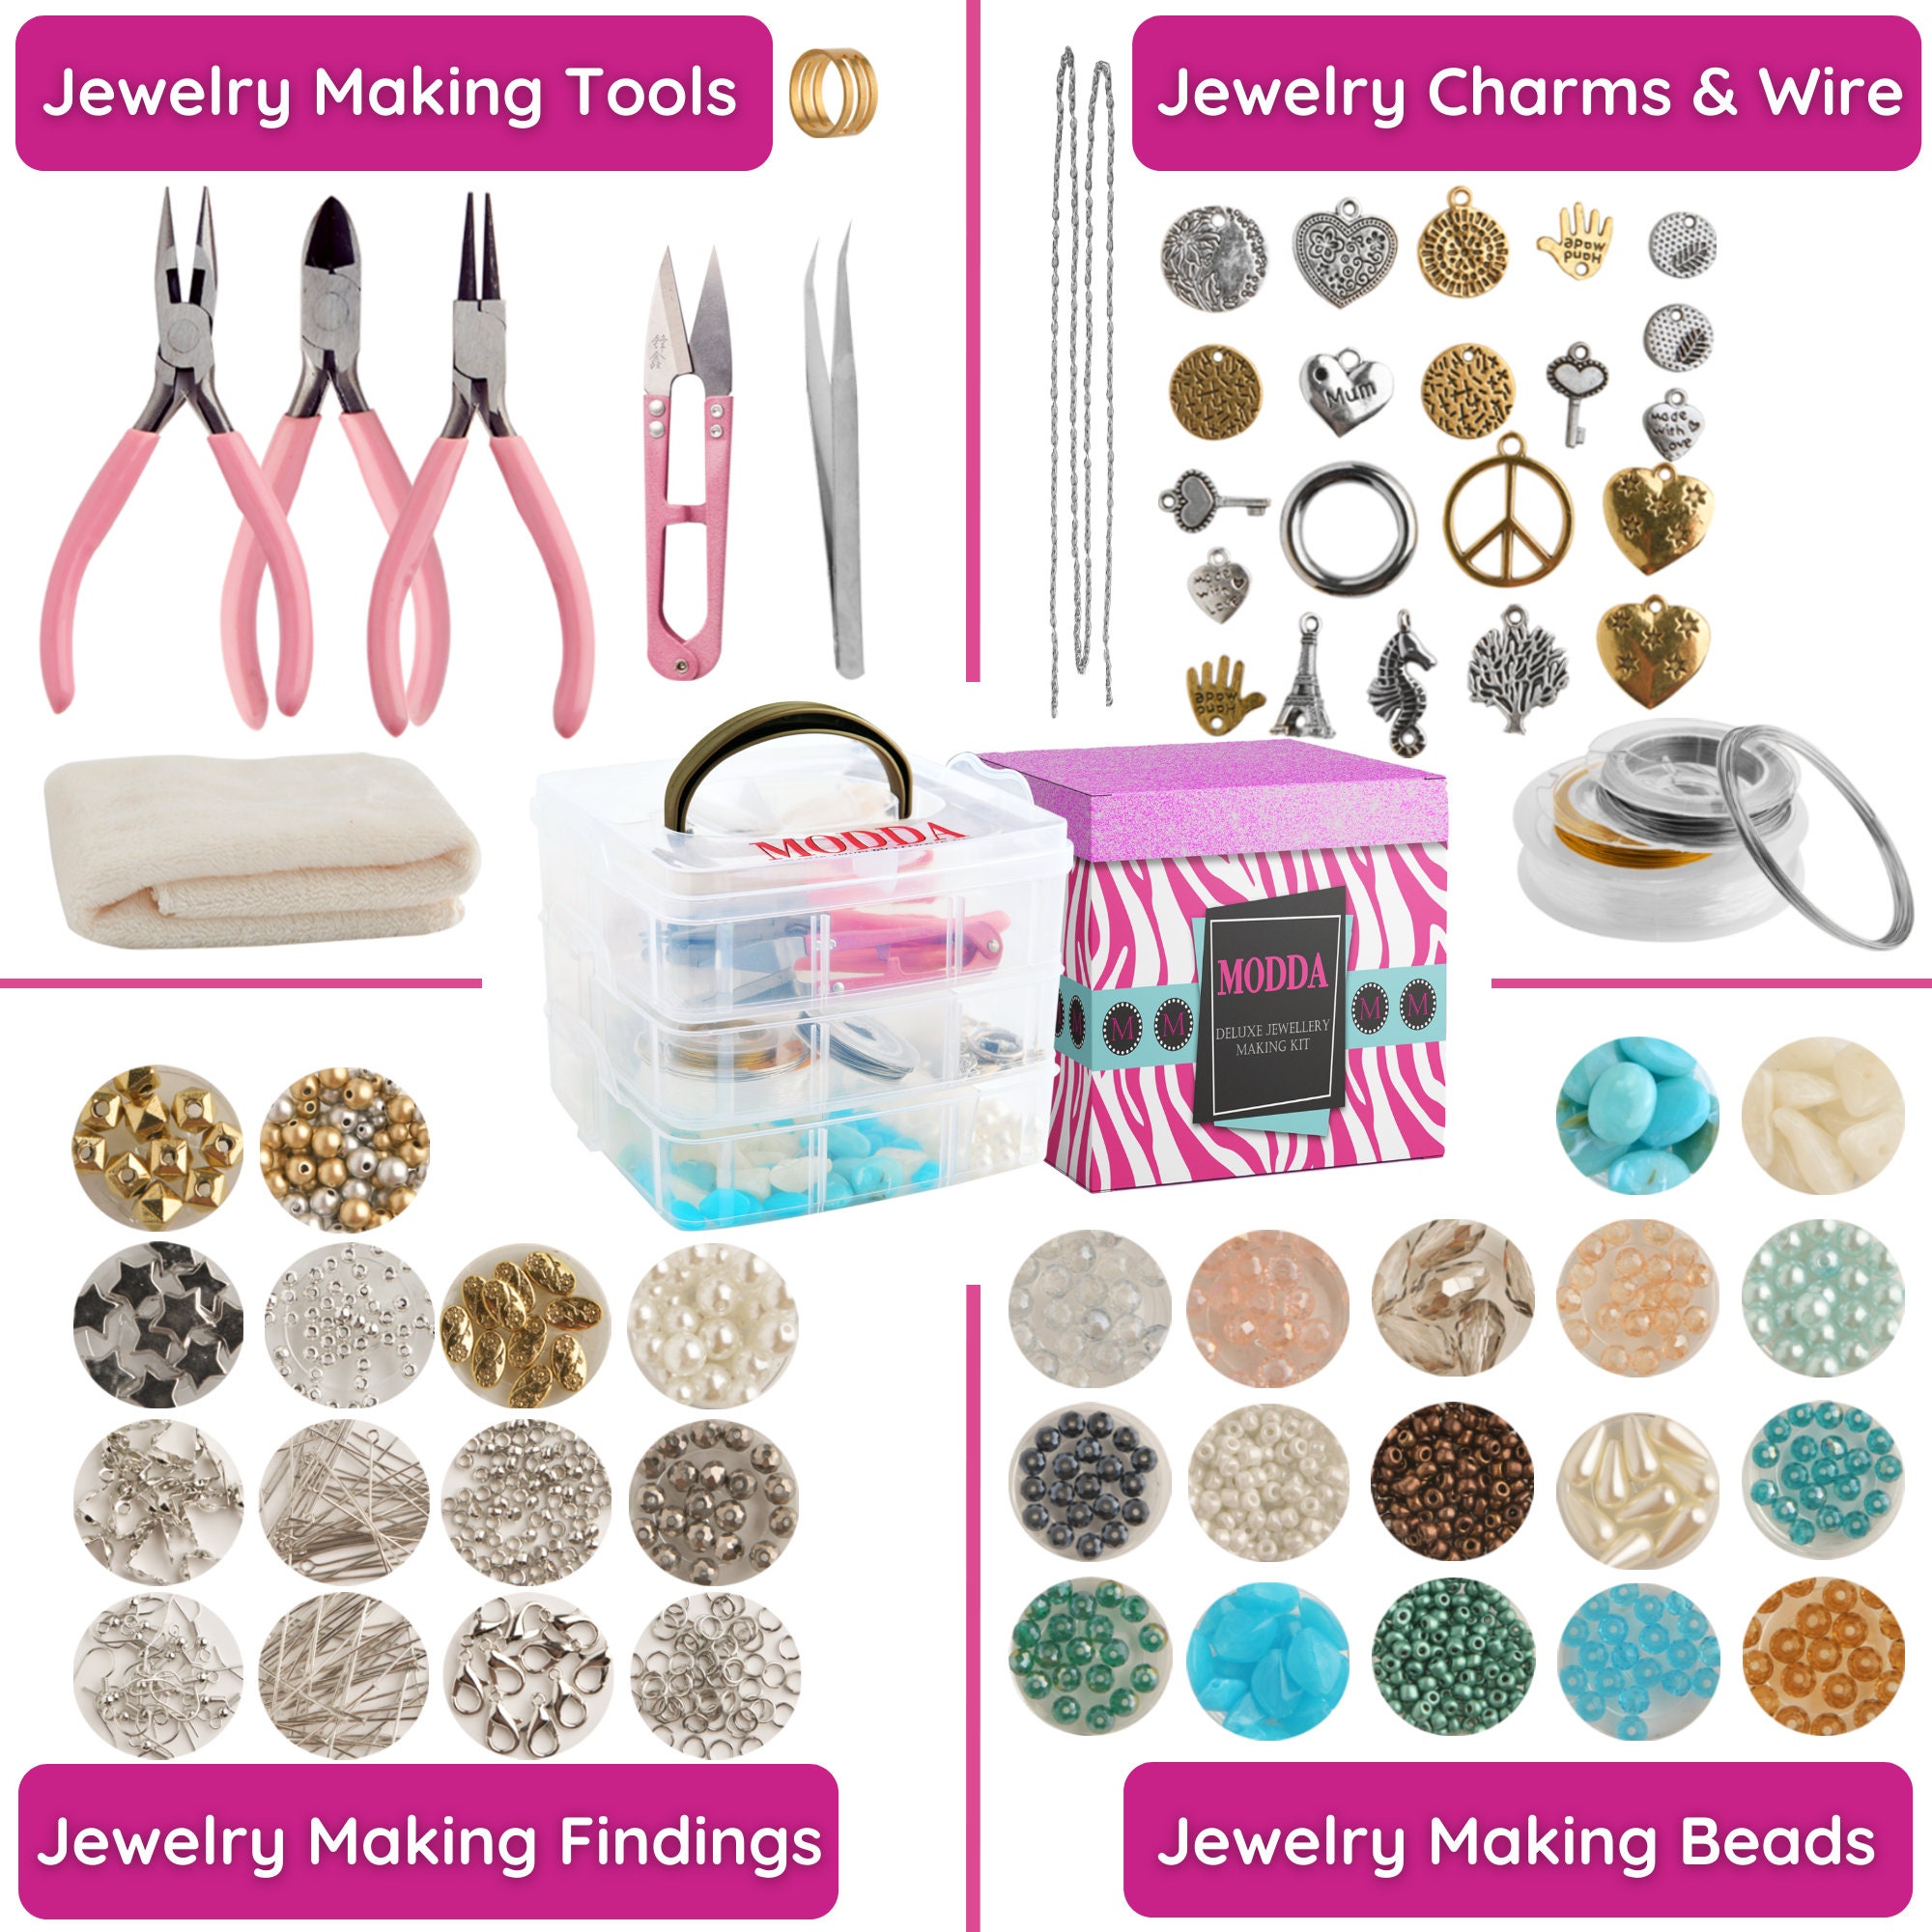  MODDA Deluxe Jewelry Making Kit with Video Course